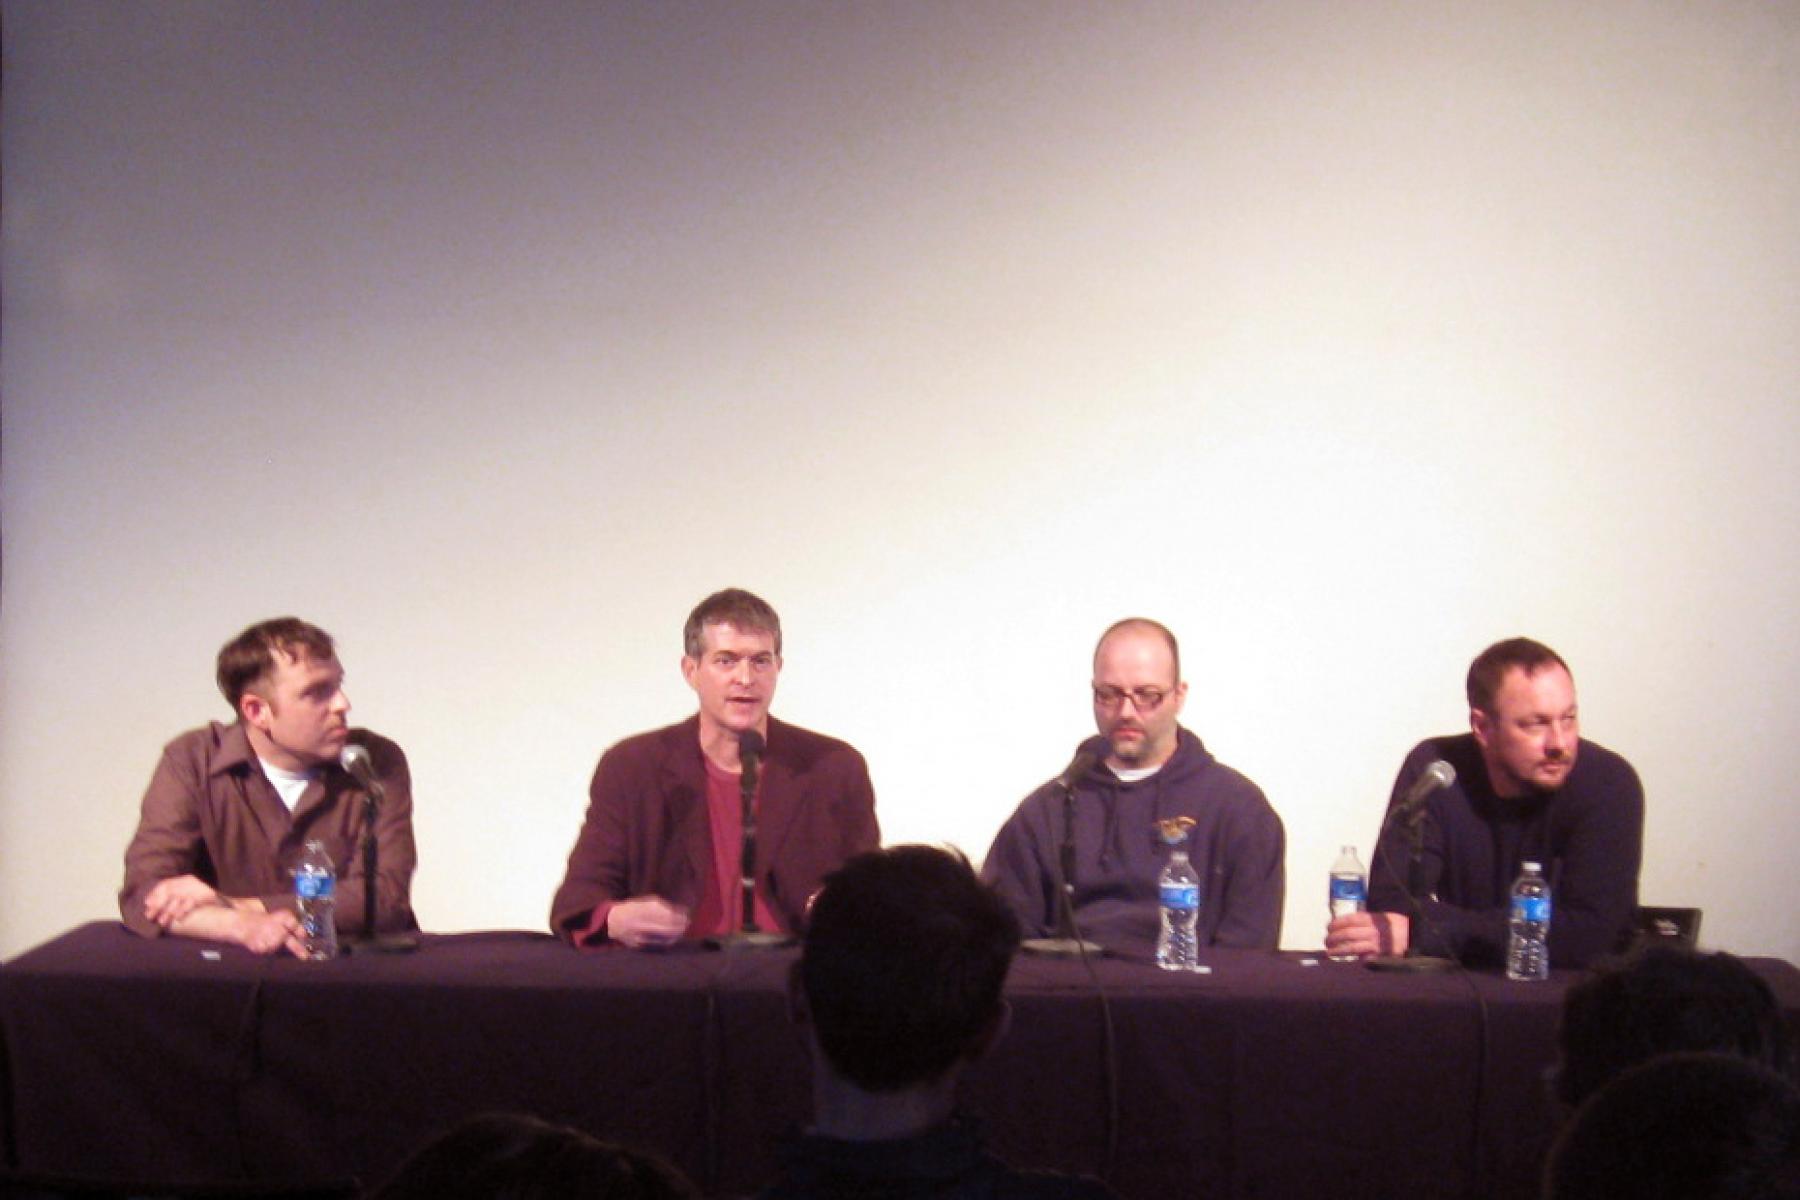 The World According to New Orleans panel discussion, featuring Skylar Fein, Dan Cameron, Dan Tague, and Srdjan Loncar